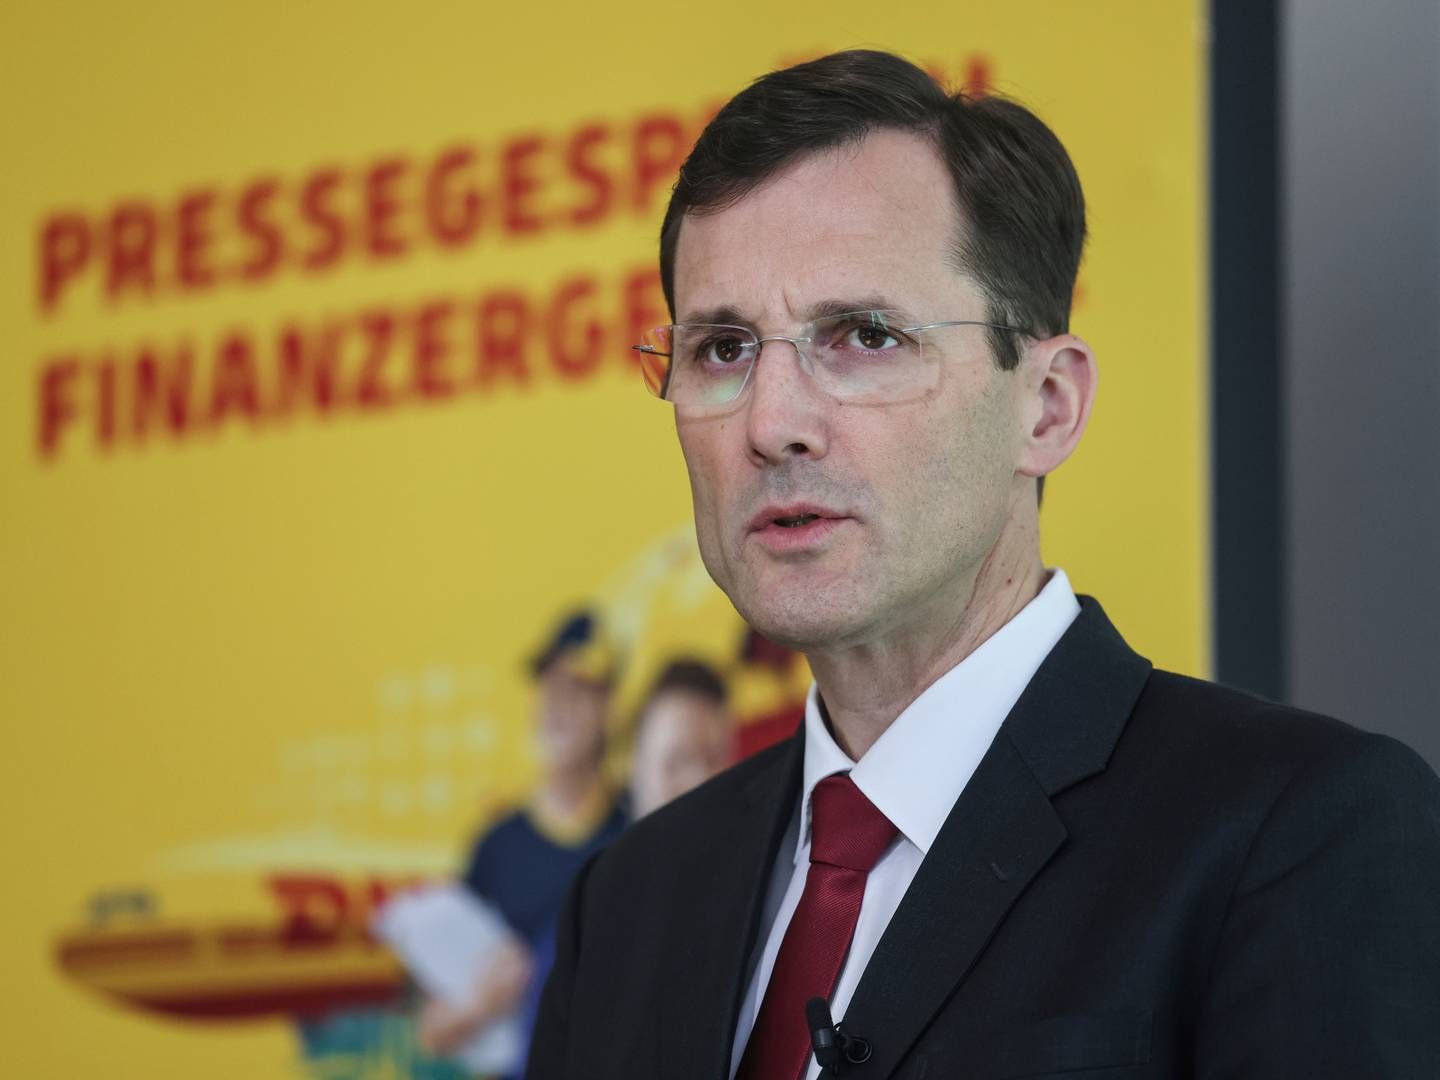 DHL and CEO Tobias Meyer are praised for focusing on a share buyback rather than a bid for DB Schenker. | Photo: Oliver Berg/AP/Ritzau Scanpix